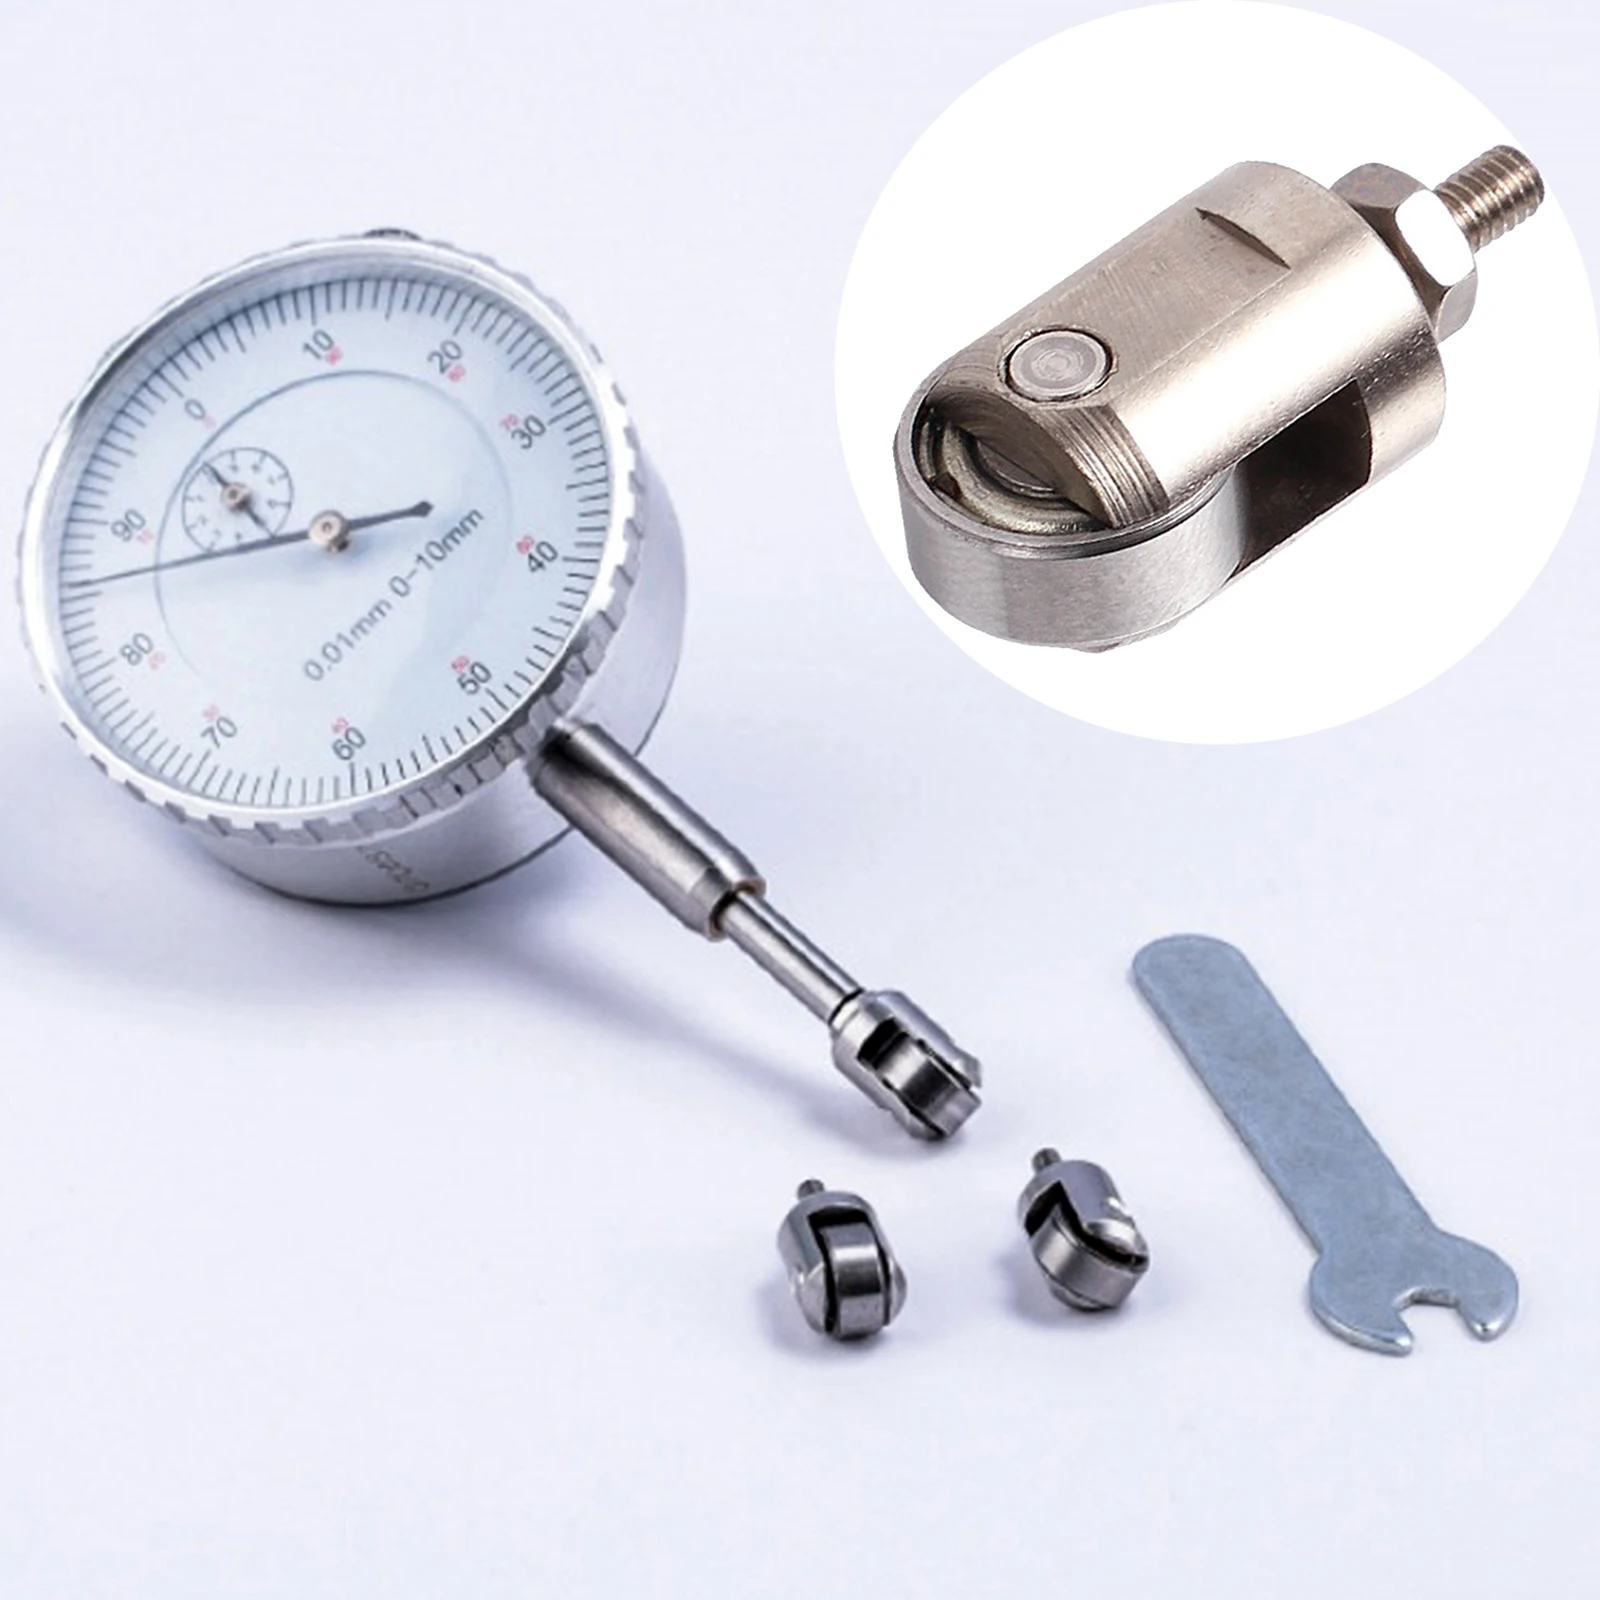 Roller Contact Point for Dial Indicator Roller Depth Gauge Tool 10mm Diameter M2.5 Thread Wheel with Check Nut Bike Rim Tester